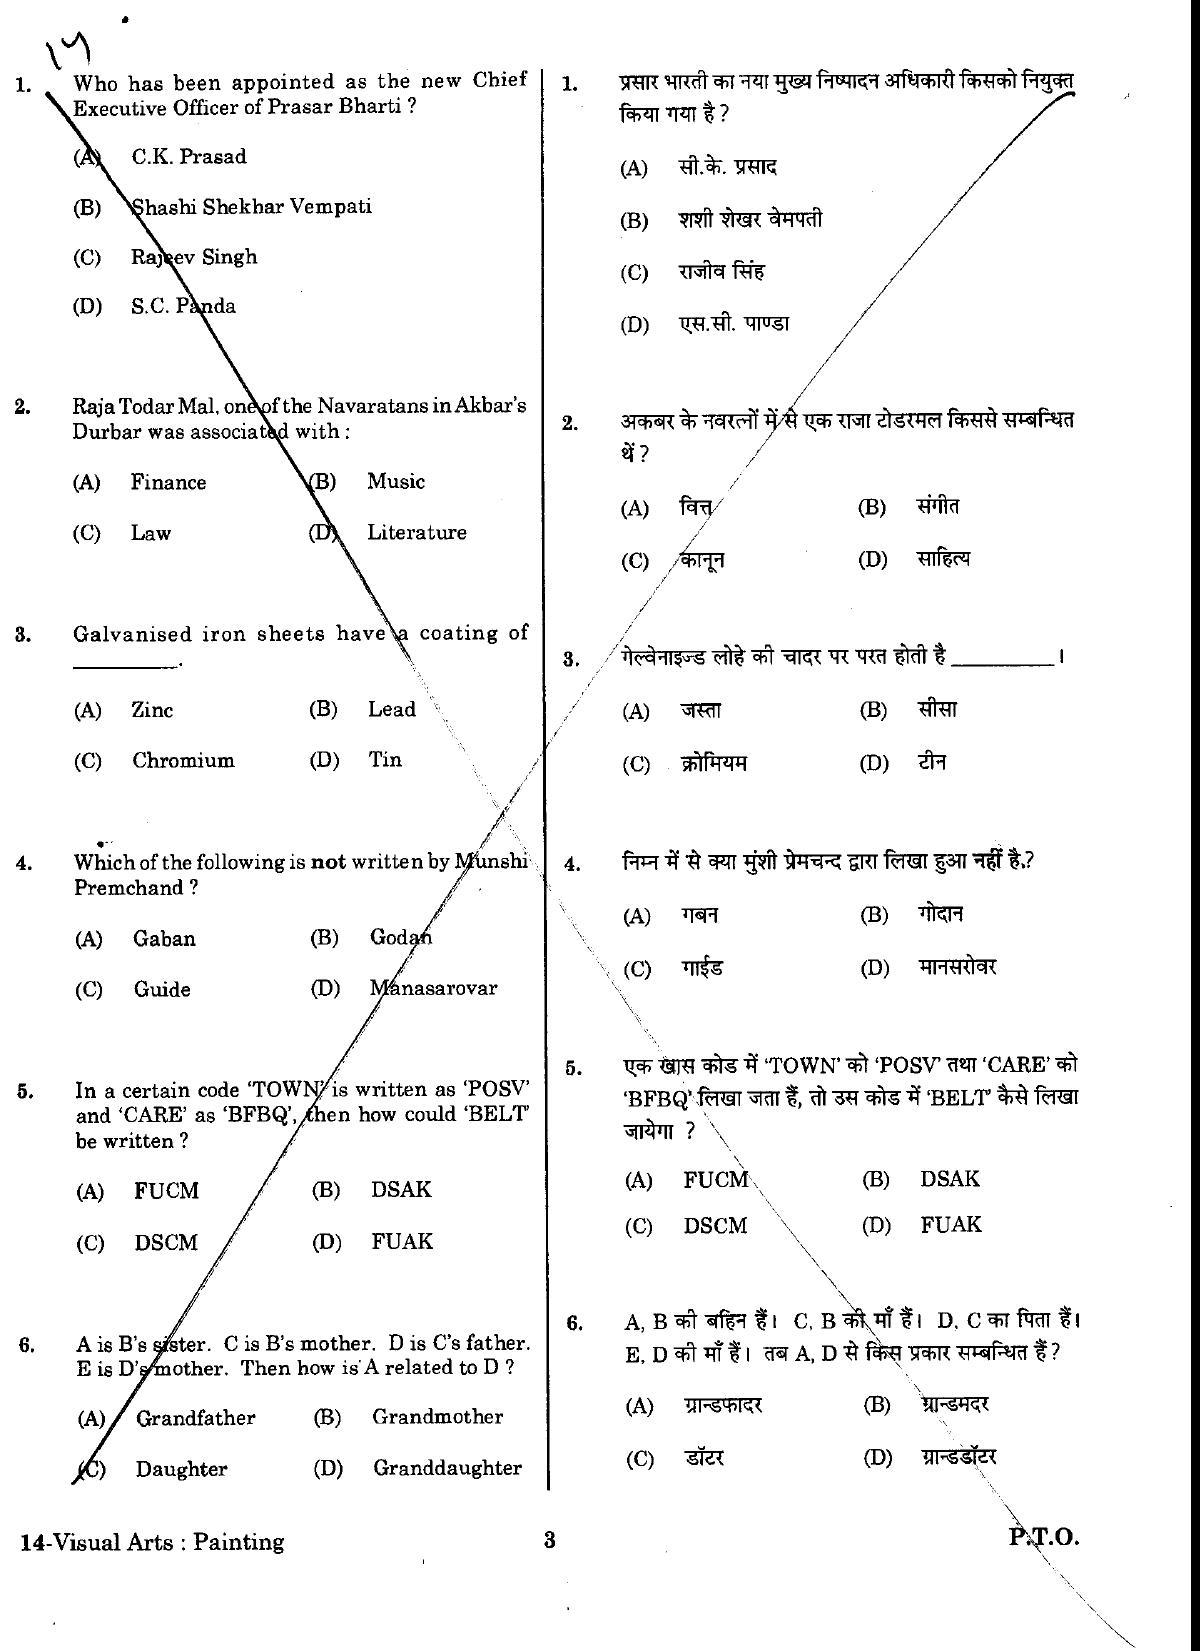 URATPG Visual Arts Painting Sample Question Paper 2018 - Page 2